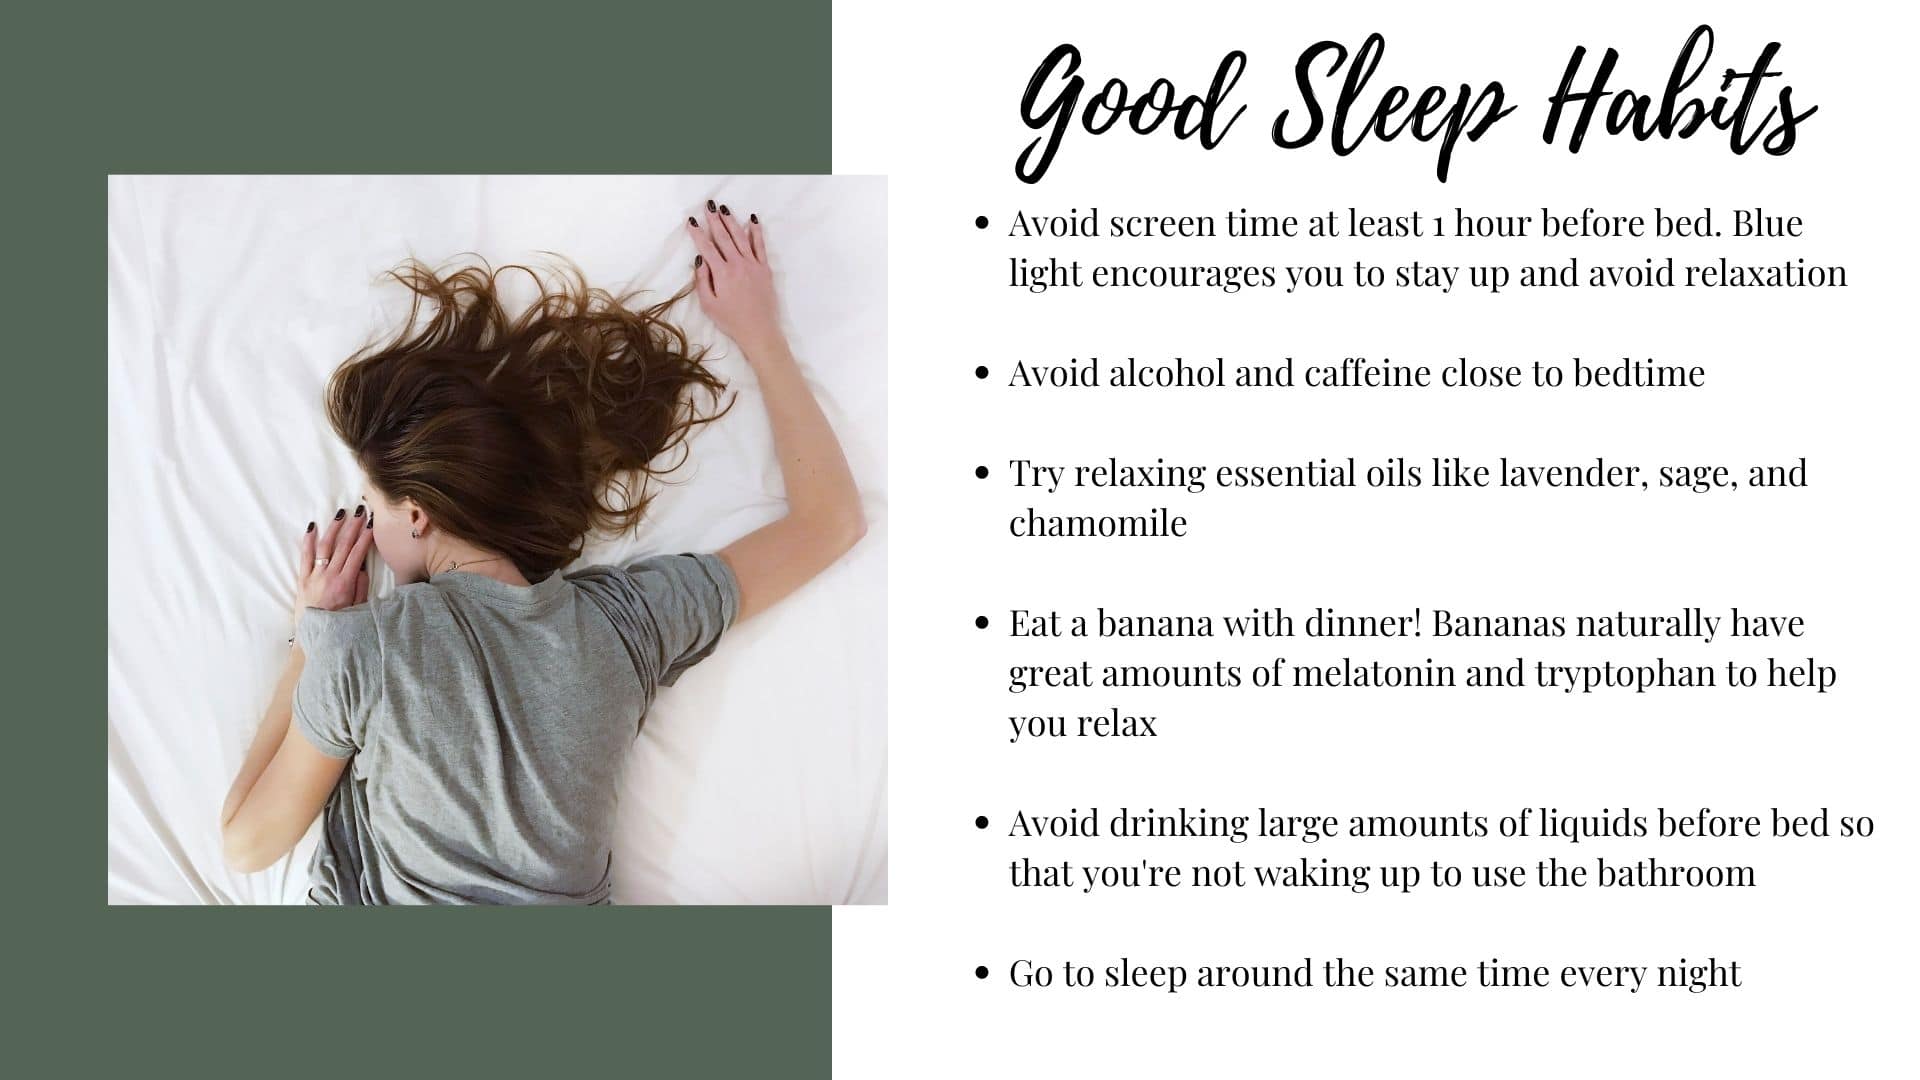 In this picture you see a list of ways to practice good sleep habits or sleep hygiene. Before bed try try to avoid screen time, avoid alcohol, try some essential oils, have a banana with dinner, don't drink may liquids before bed, and try going to sleep at the same time very night.